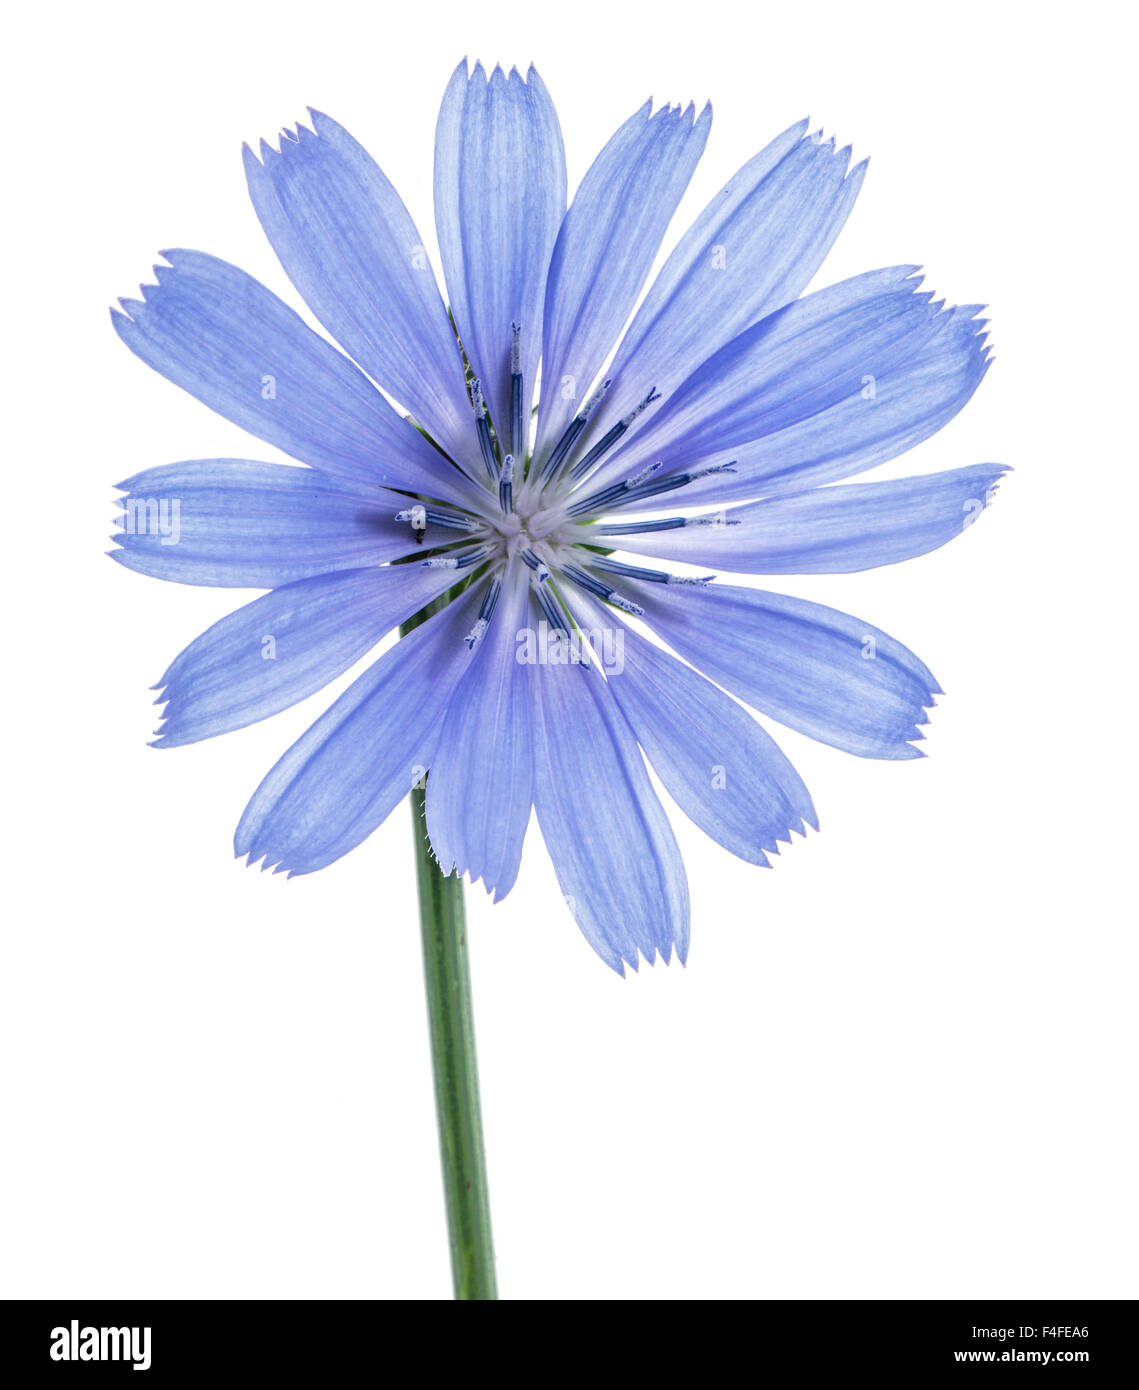 Cichorium intybus - common chicory flowers isolated on the white background. Stock Photo